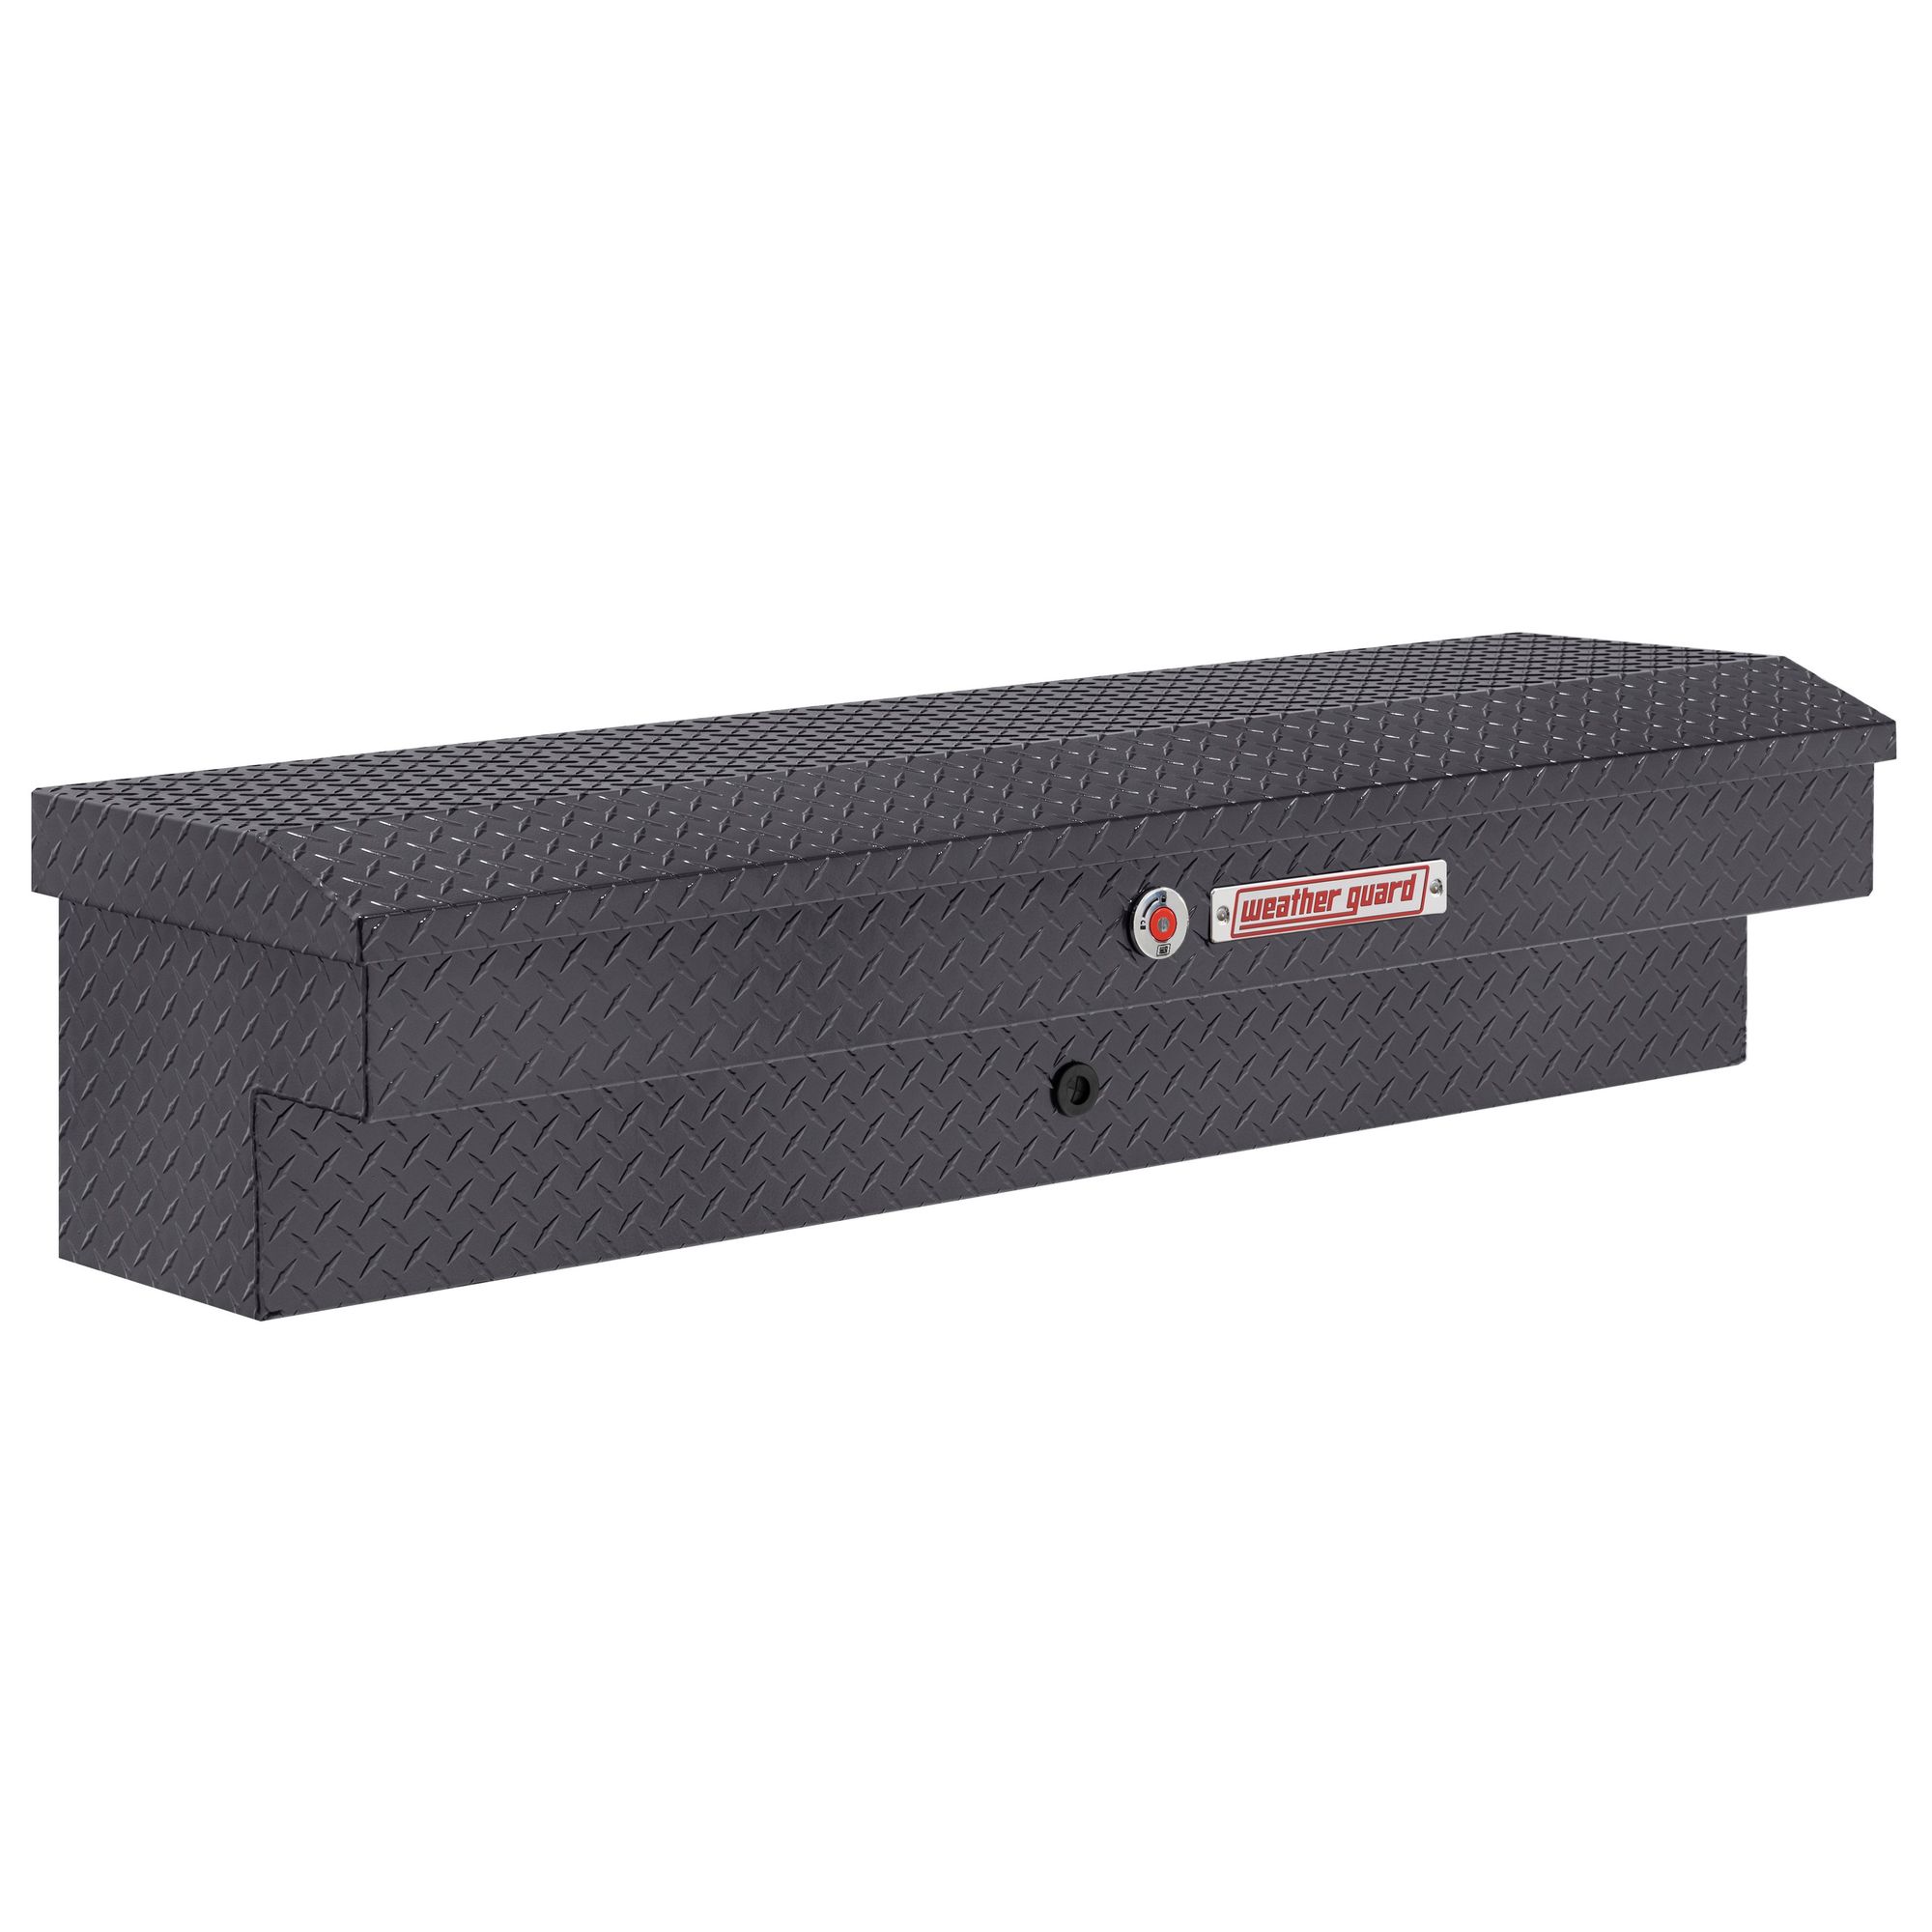 Weather Guard, 56Inch L Lo-Side Box, Width 56 in, Material Aluminum, Color Finish Gray, Model 174-6-04